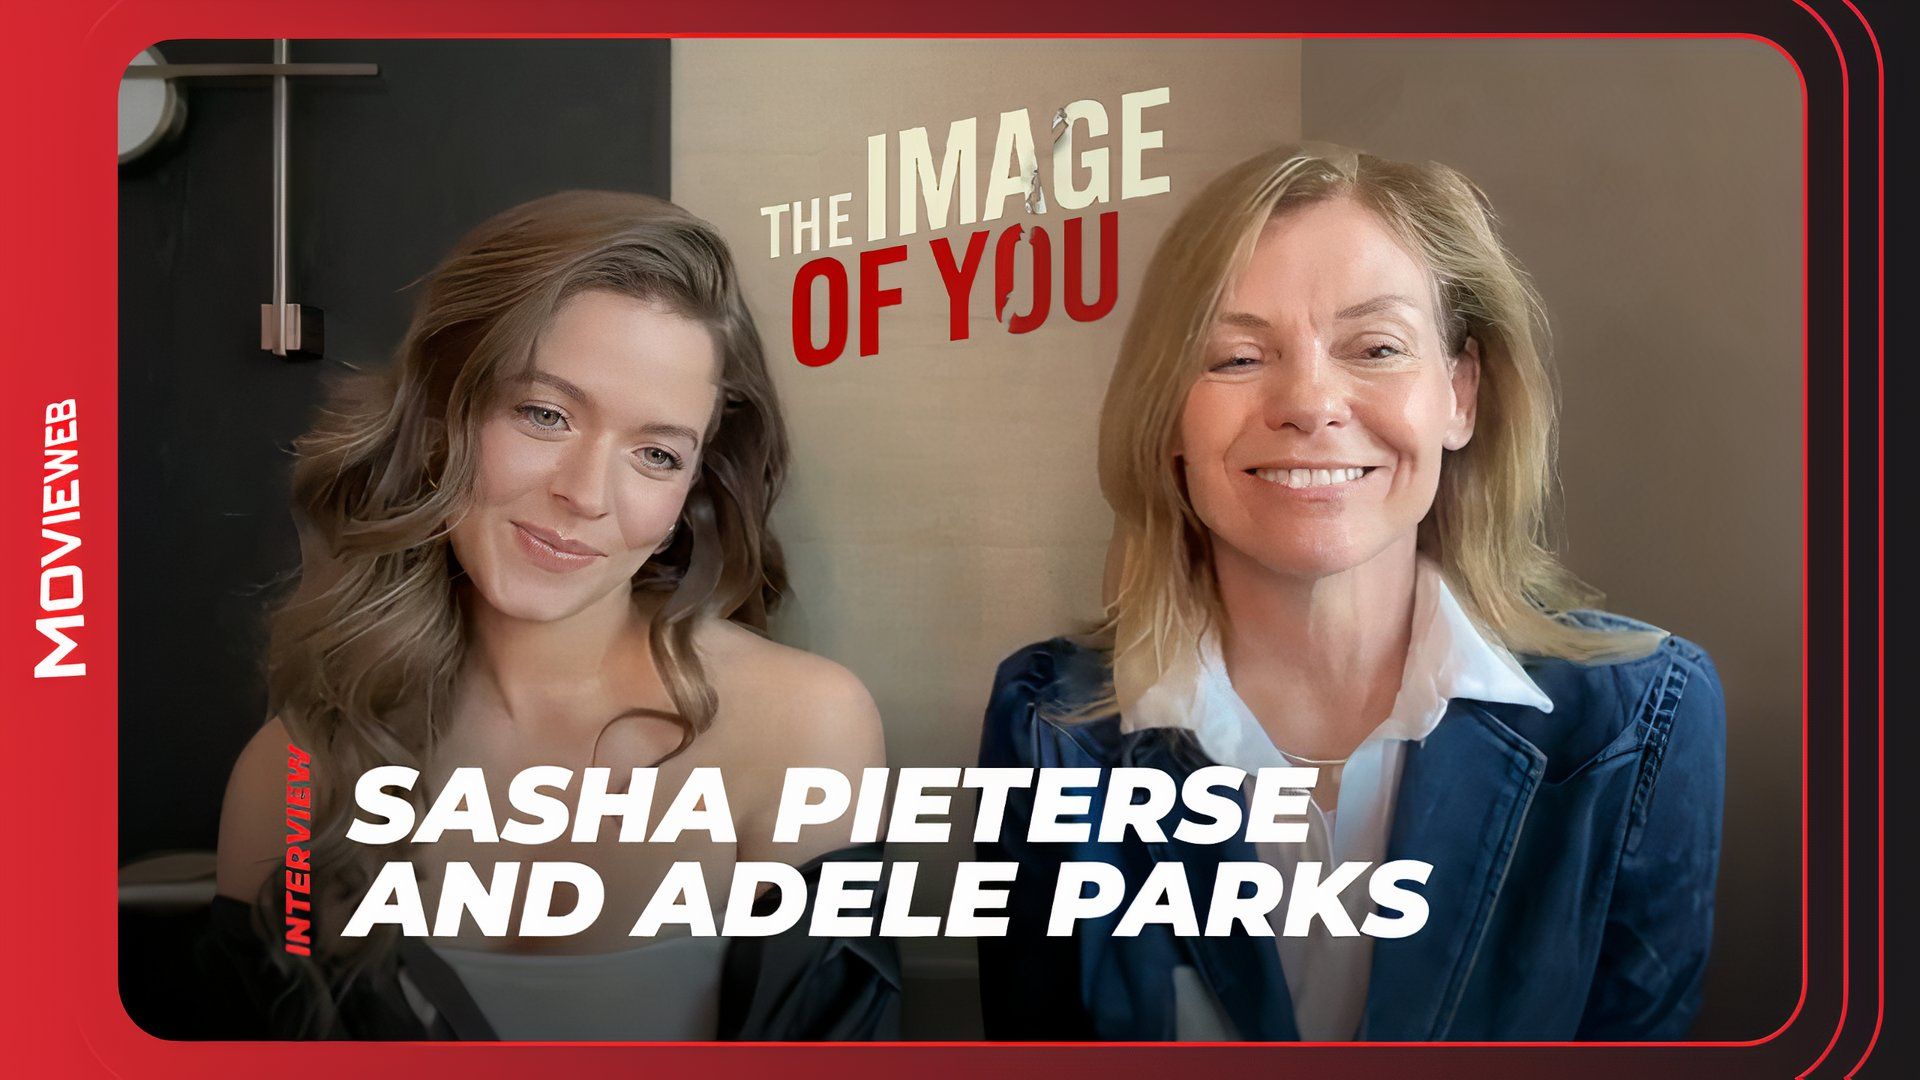 The Image of You - Sasha Pieterse and Adele Parks